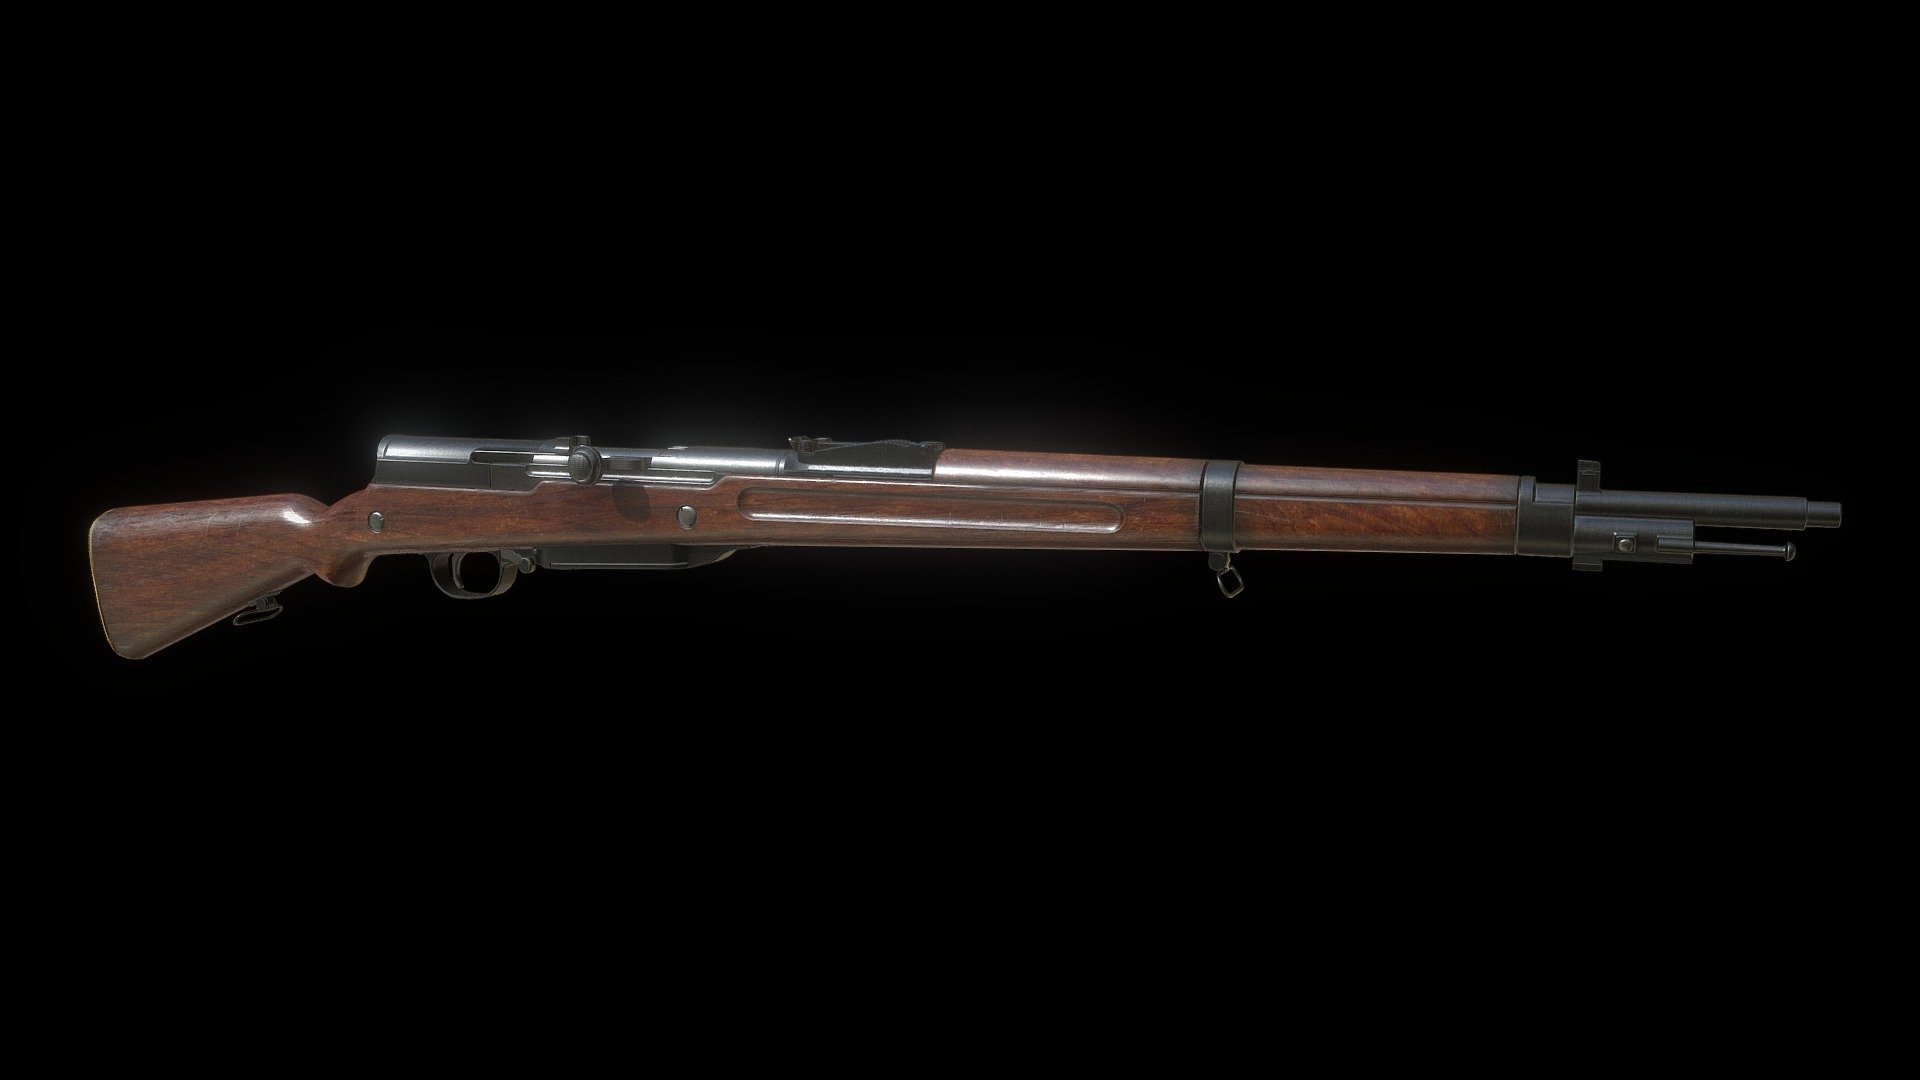 French semi-auto prototype rifle (pre-WW1). Designed to become the world's first standard-issue semi-auto, but the early onset of the war put an end to this ambition. Widely regarded as the most advanced rifle in the world at the time 3d model